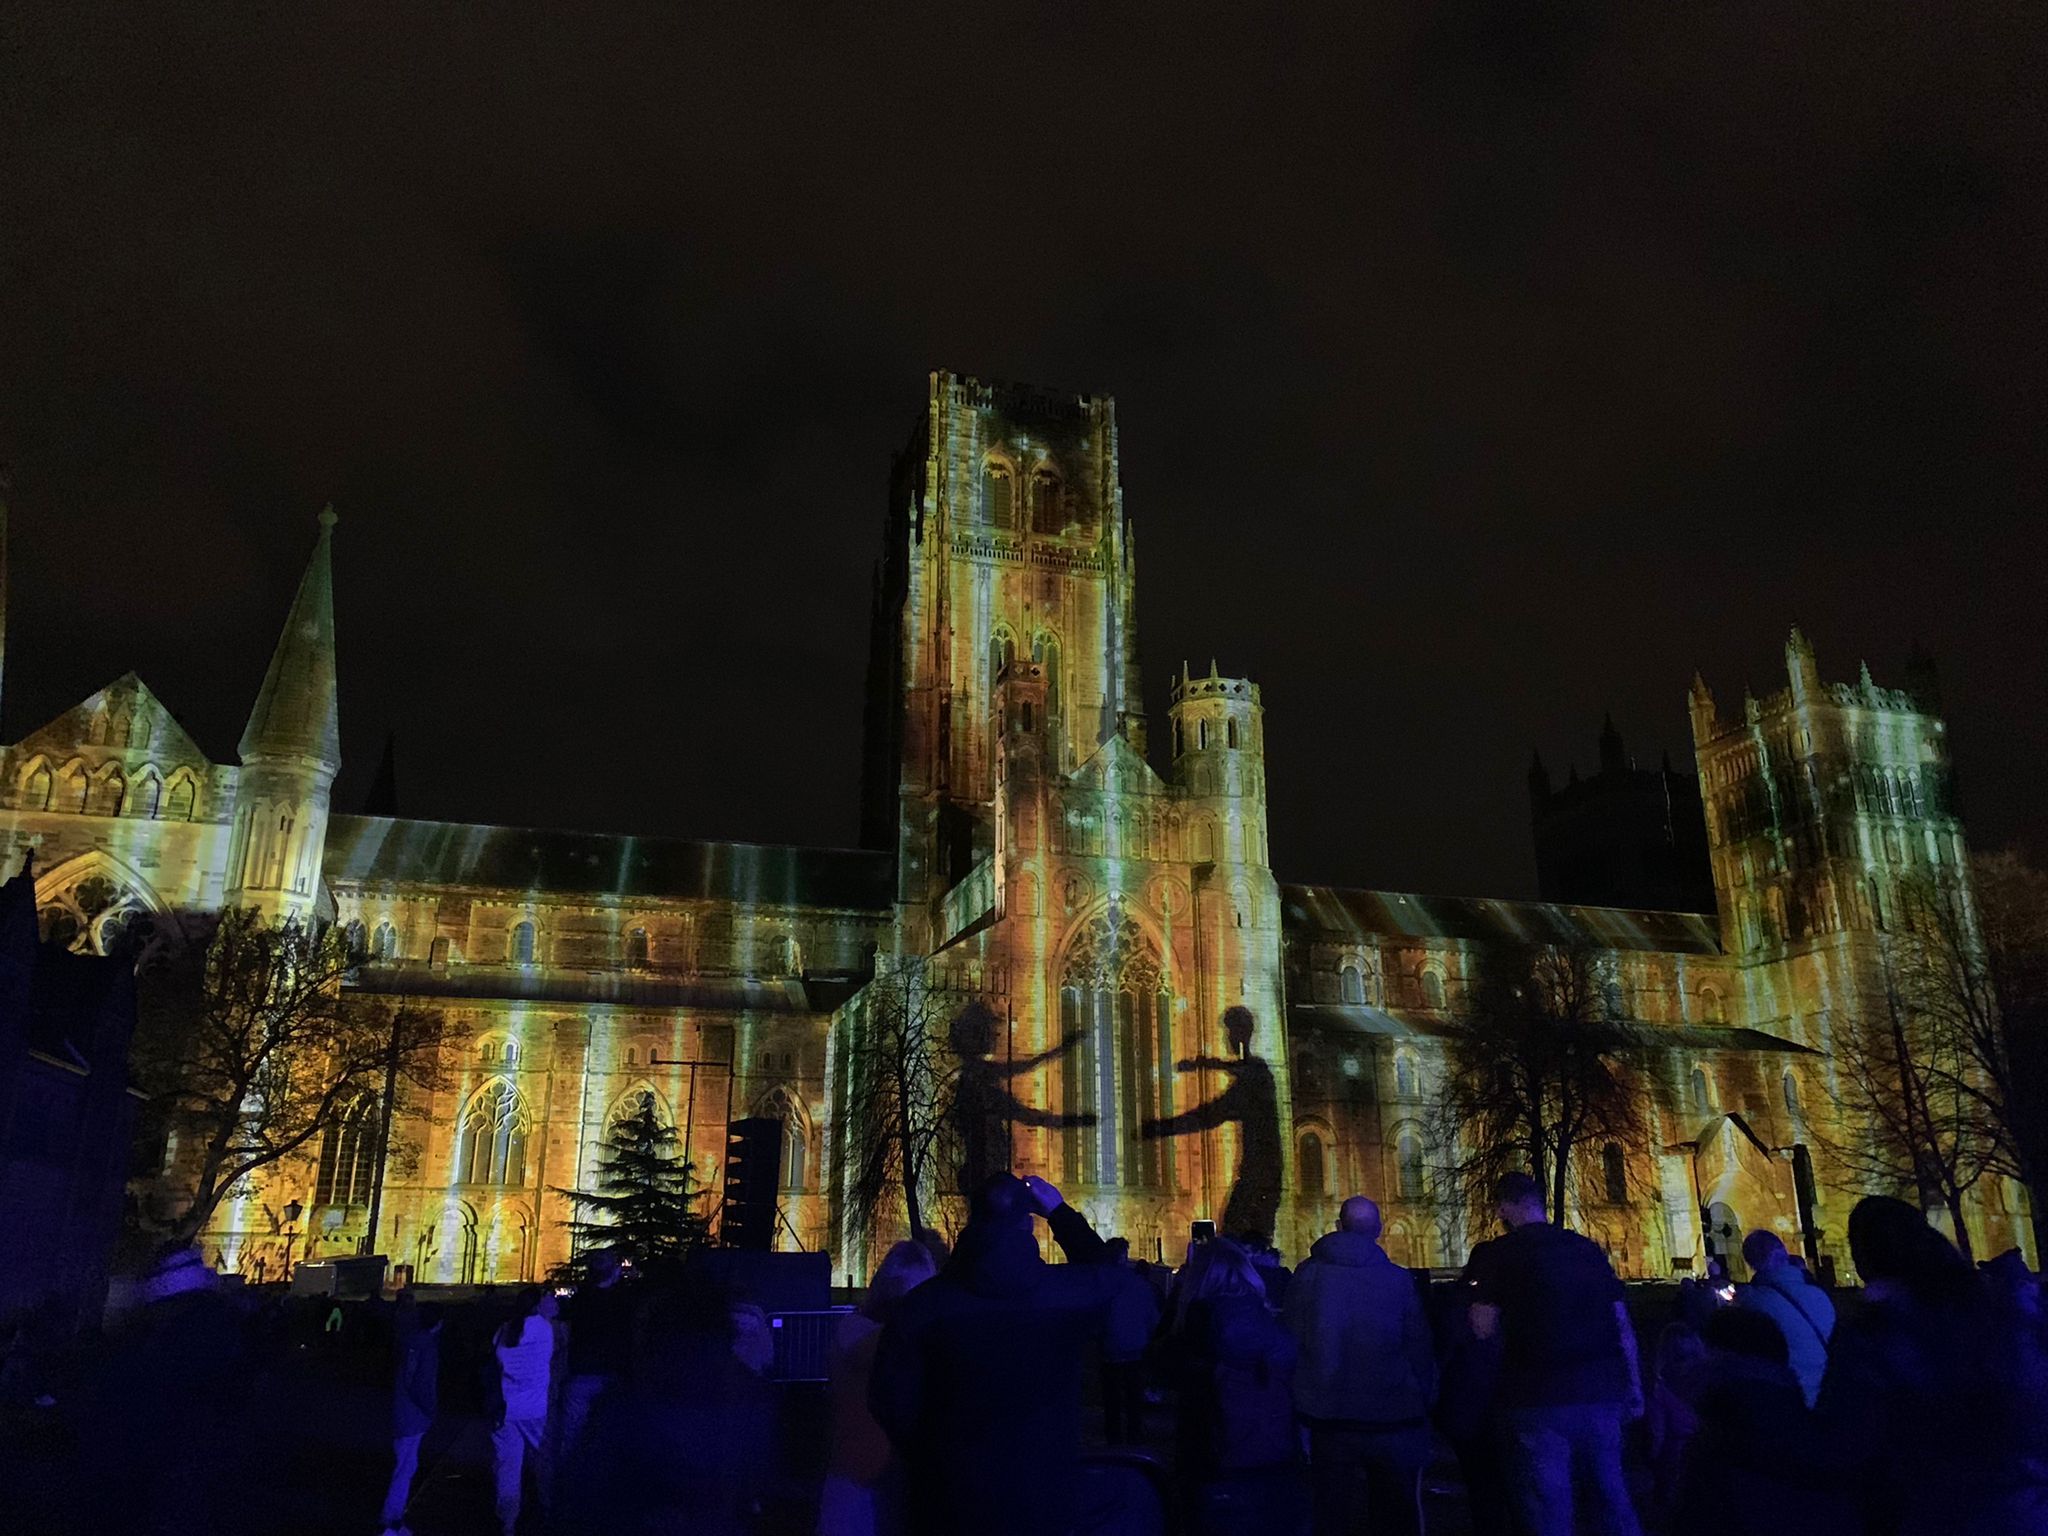 Durham Cathedral illuminated during the Lumiere festival with crowds in the foreground